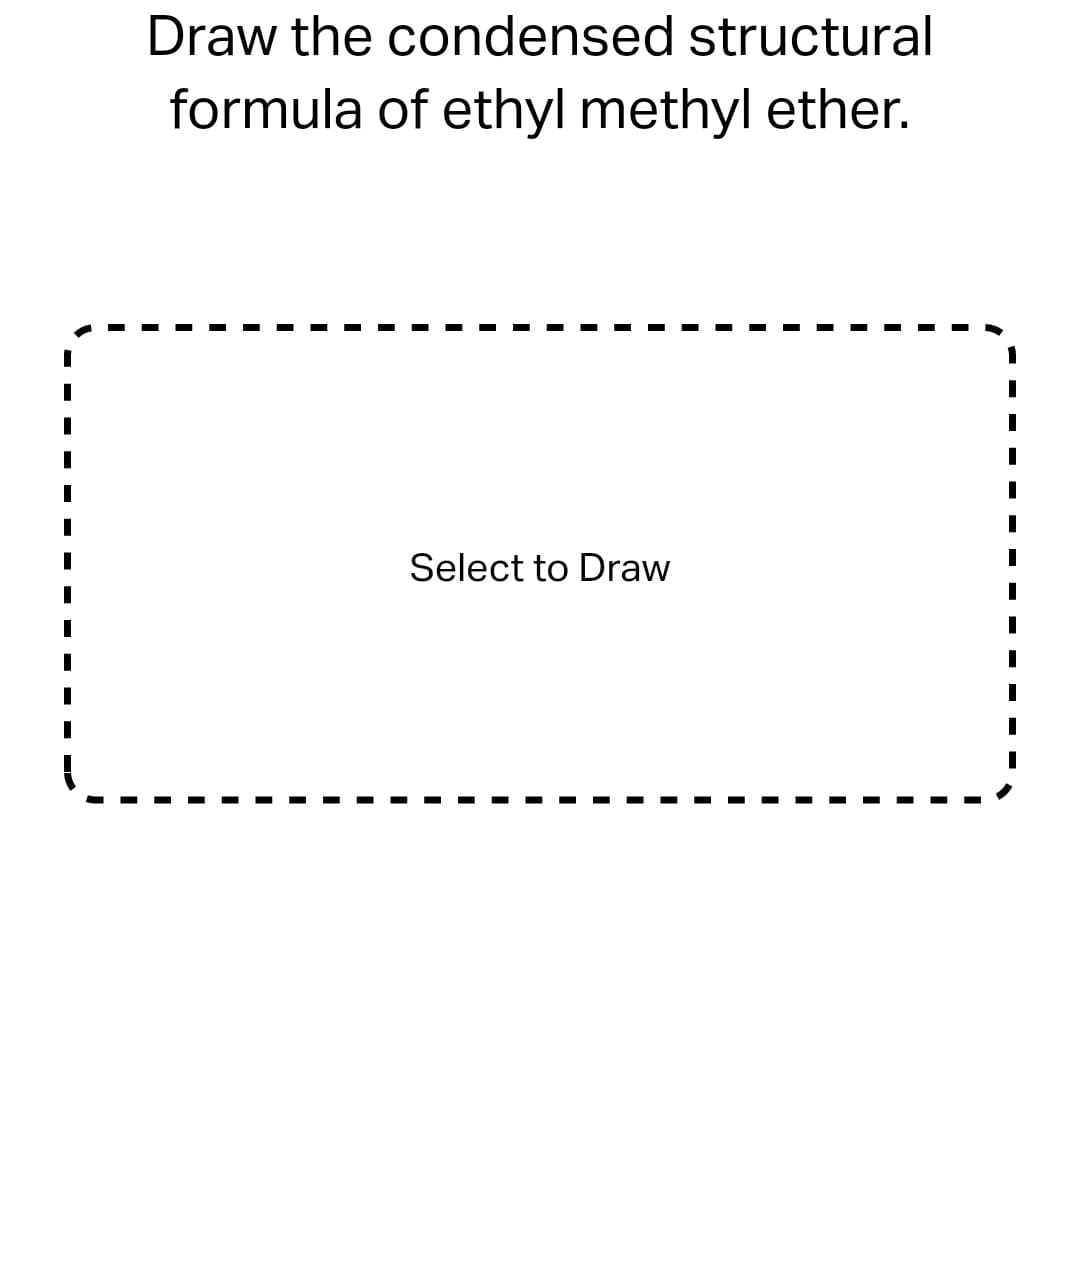 Draw the condensed structural
formula of ethyl methyl ether.
Select to Draw